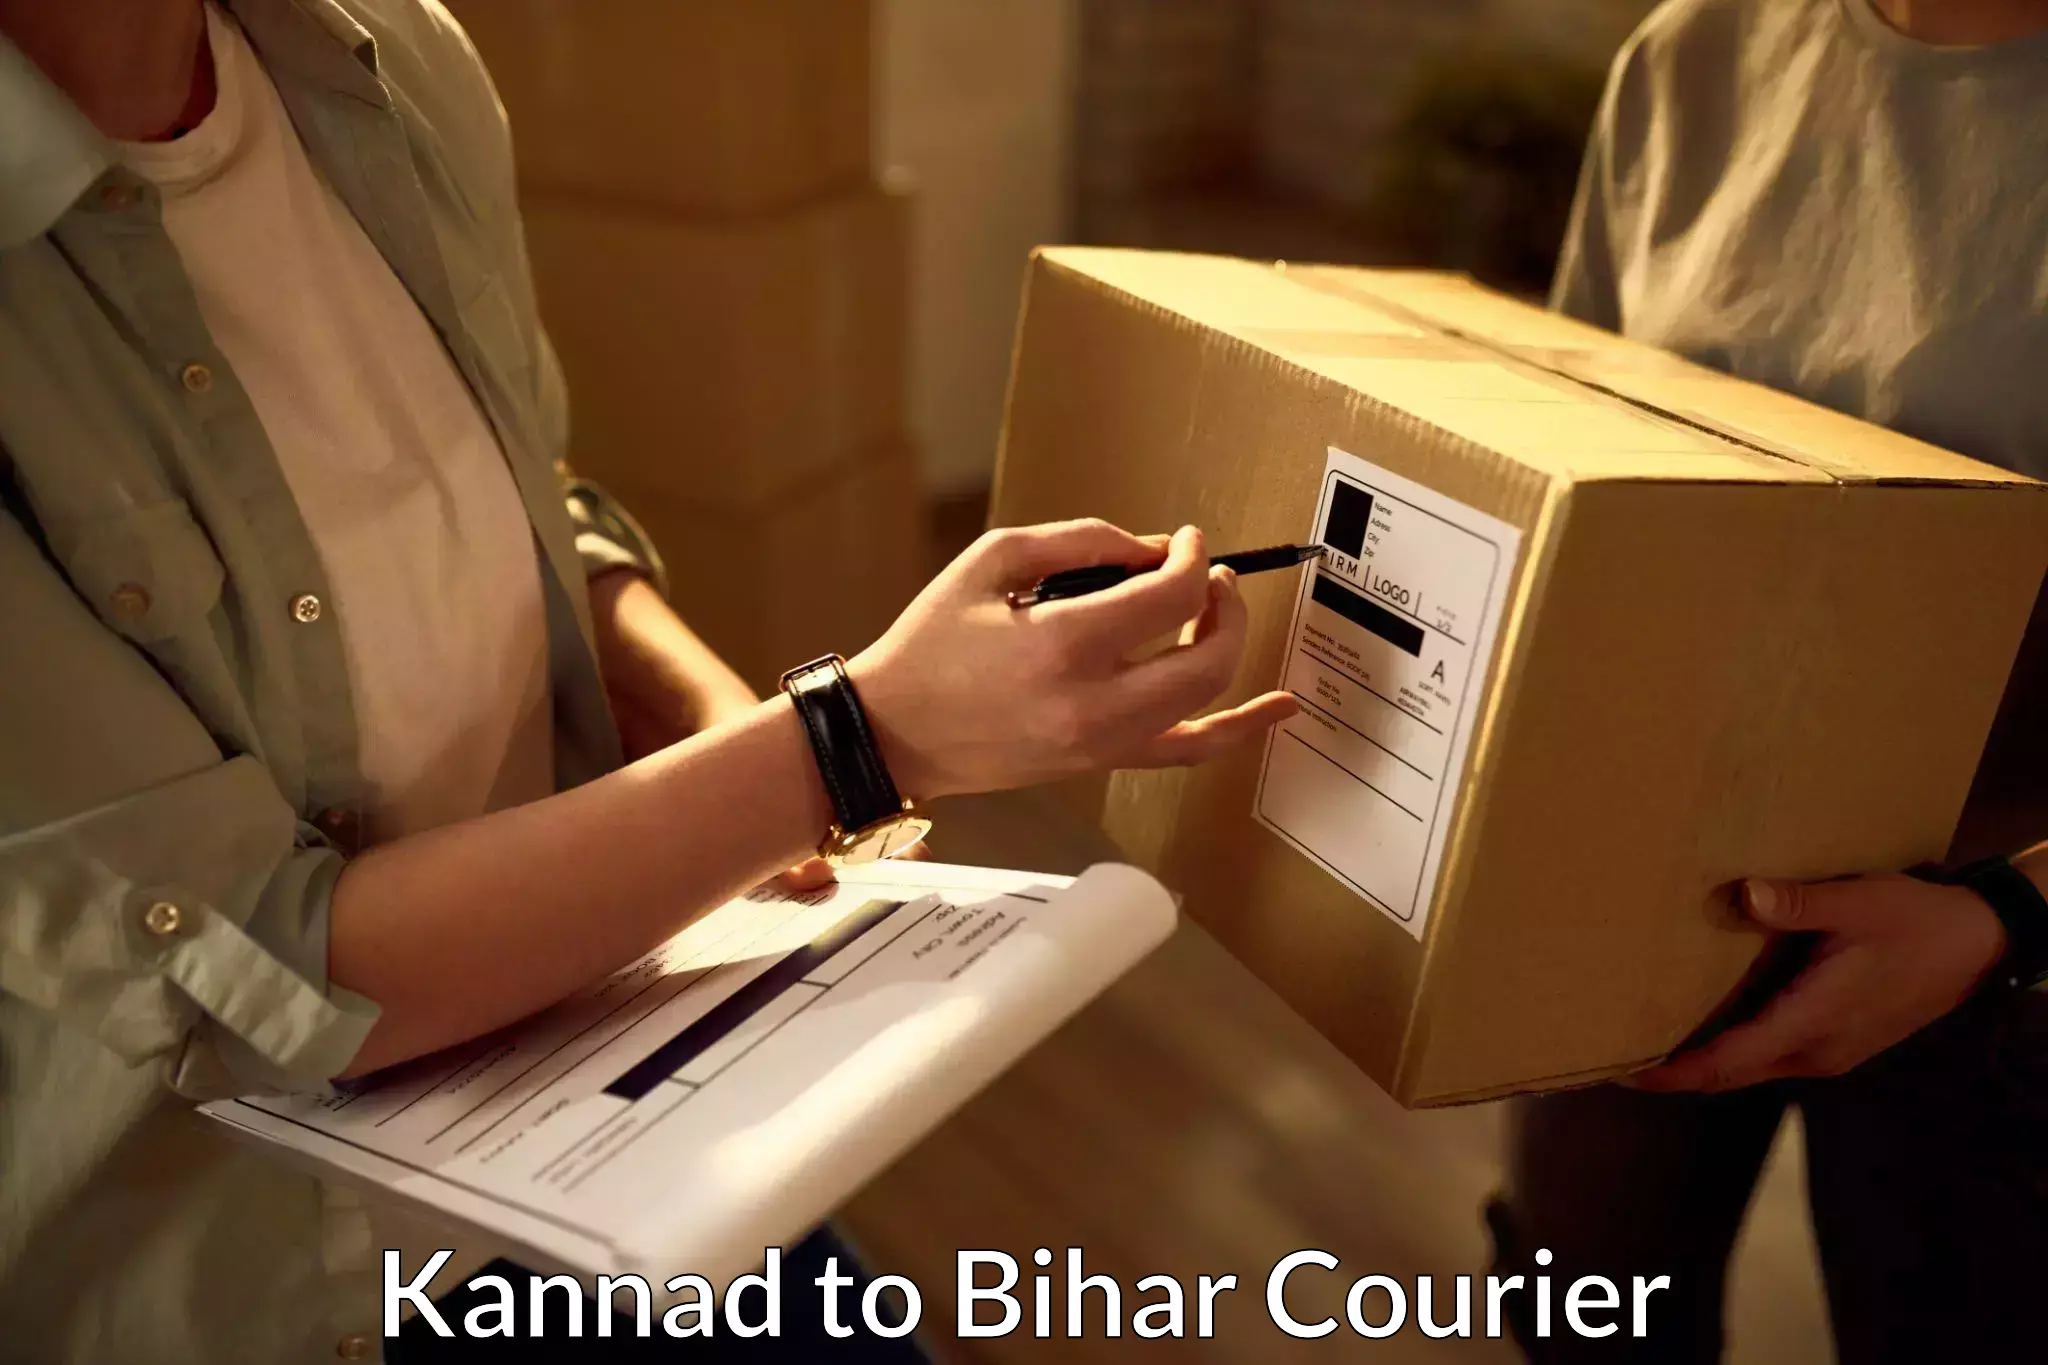 Weekend courier service in Kannad to Darbhanga